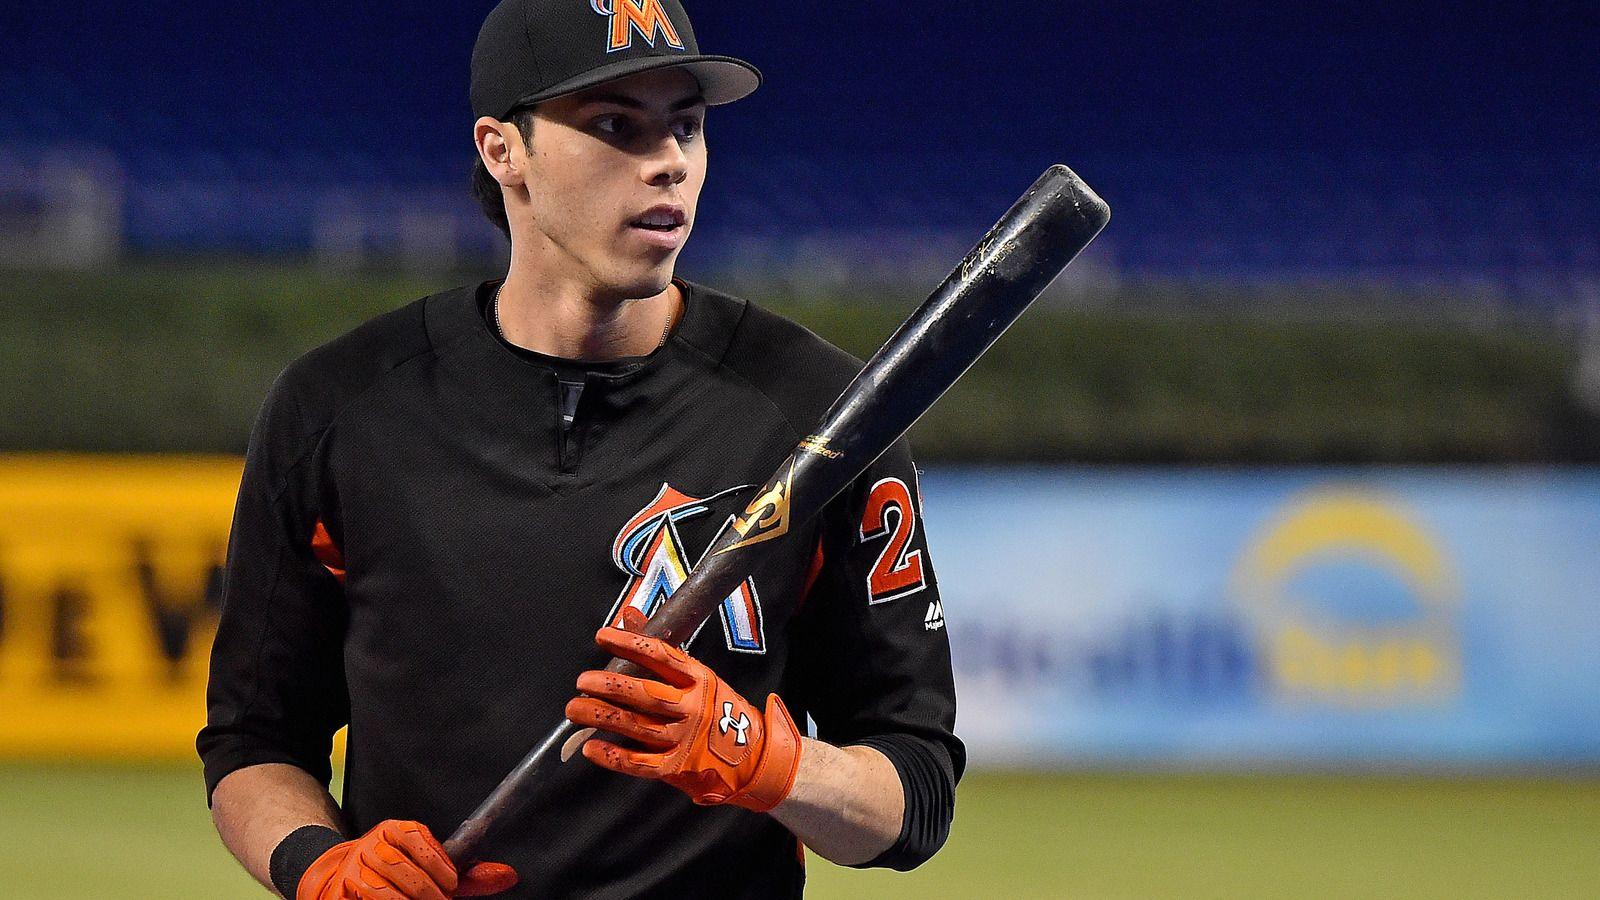 Christian Yelich traded to Brewers